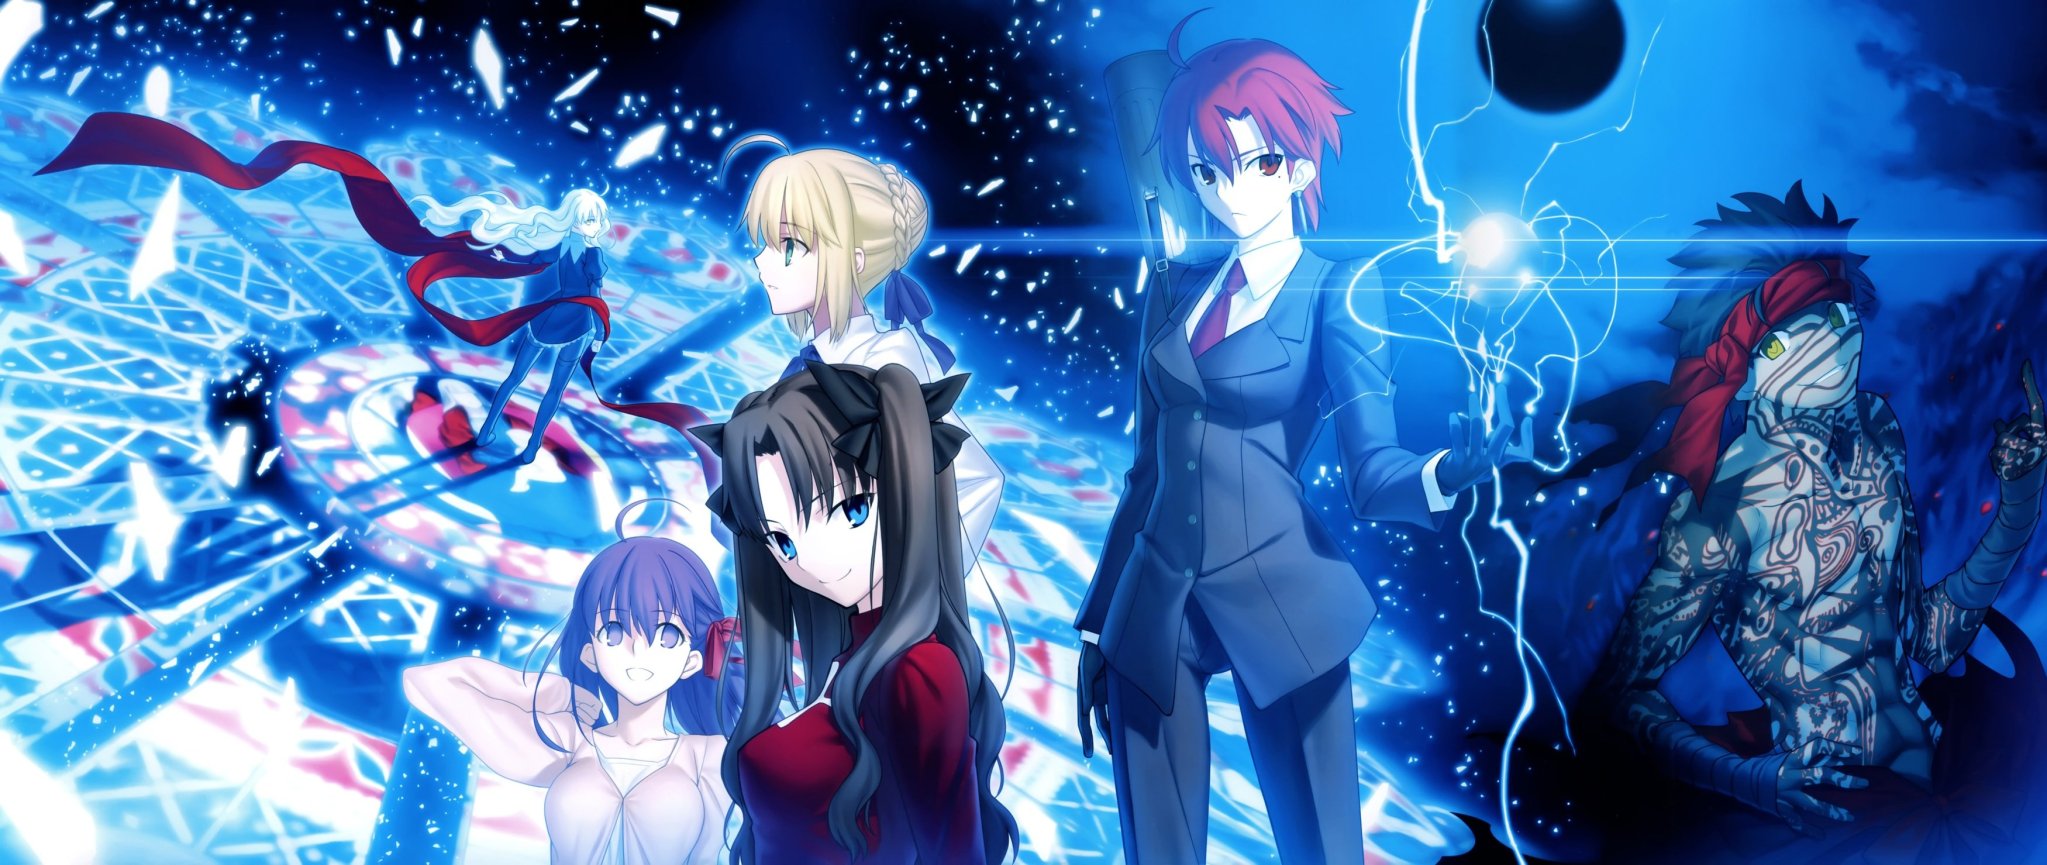 Images of Fate Hollow Ataraxia | 2047x865